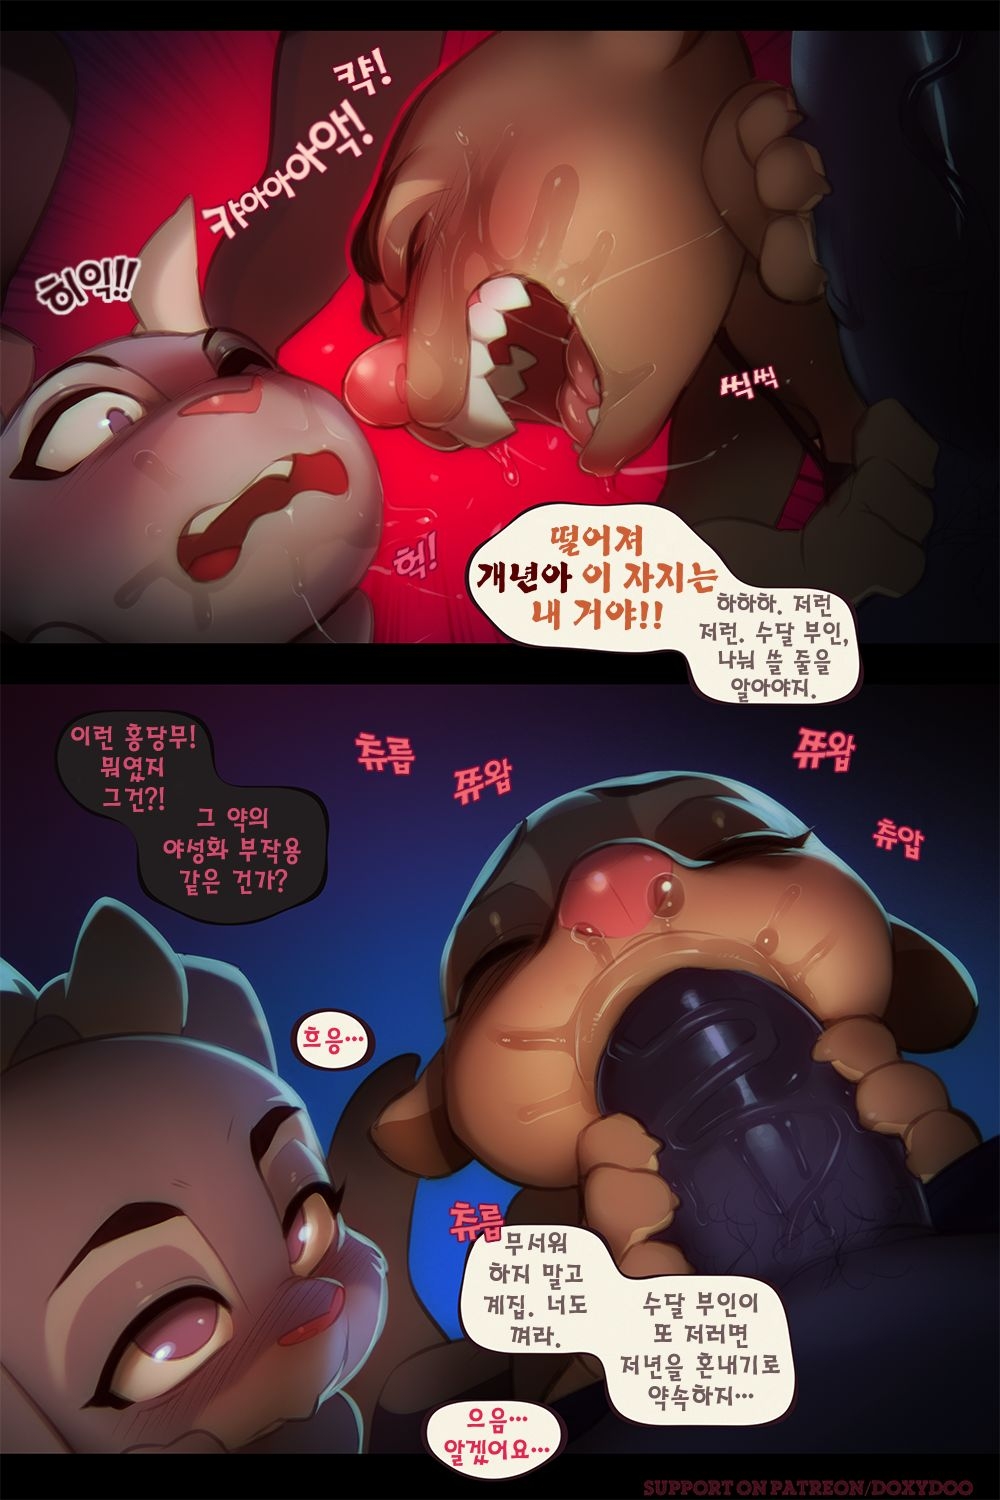 [Doxy] Sweet Sting Part 2: Down The Rabbit Hole | 달콤한 함정수사 2부: 토끼 굴속으로 (Zootopia) [Korean] [Ongoing] 14